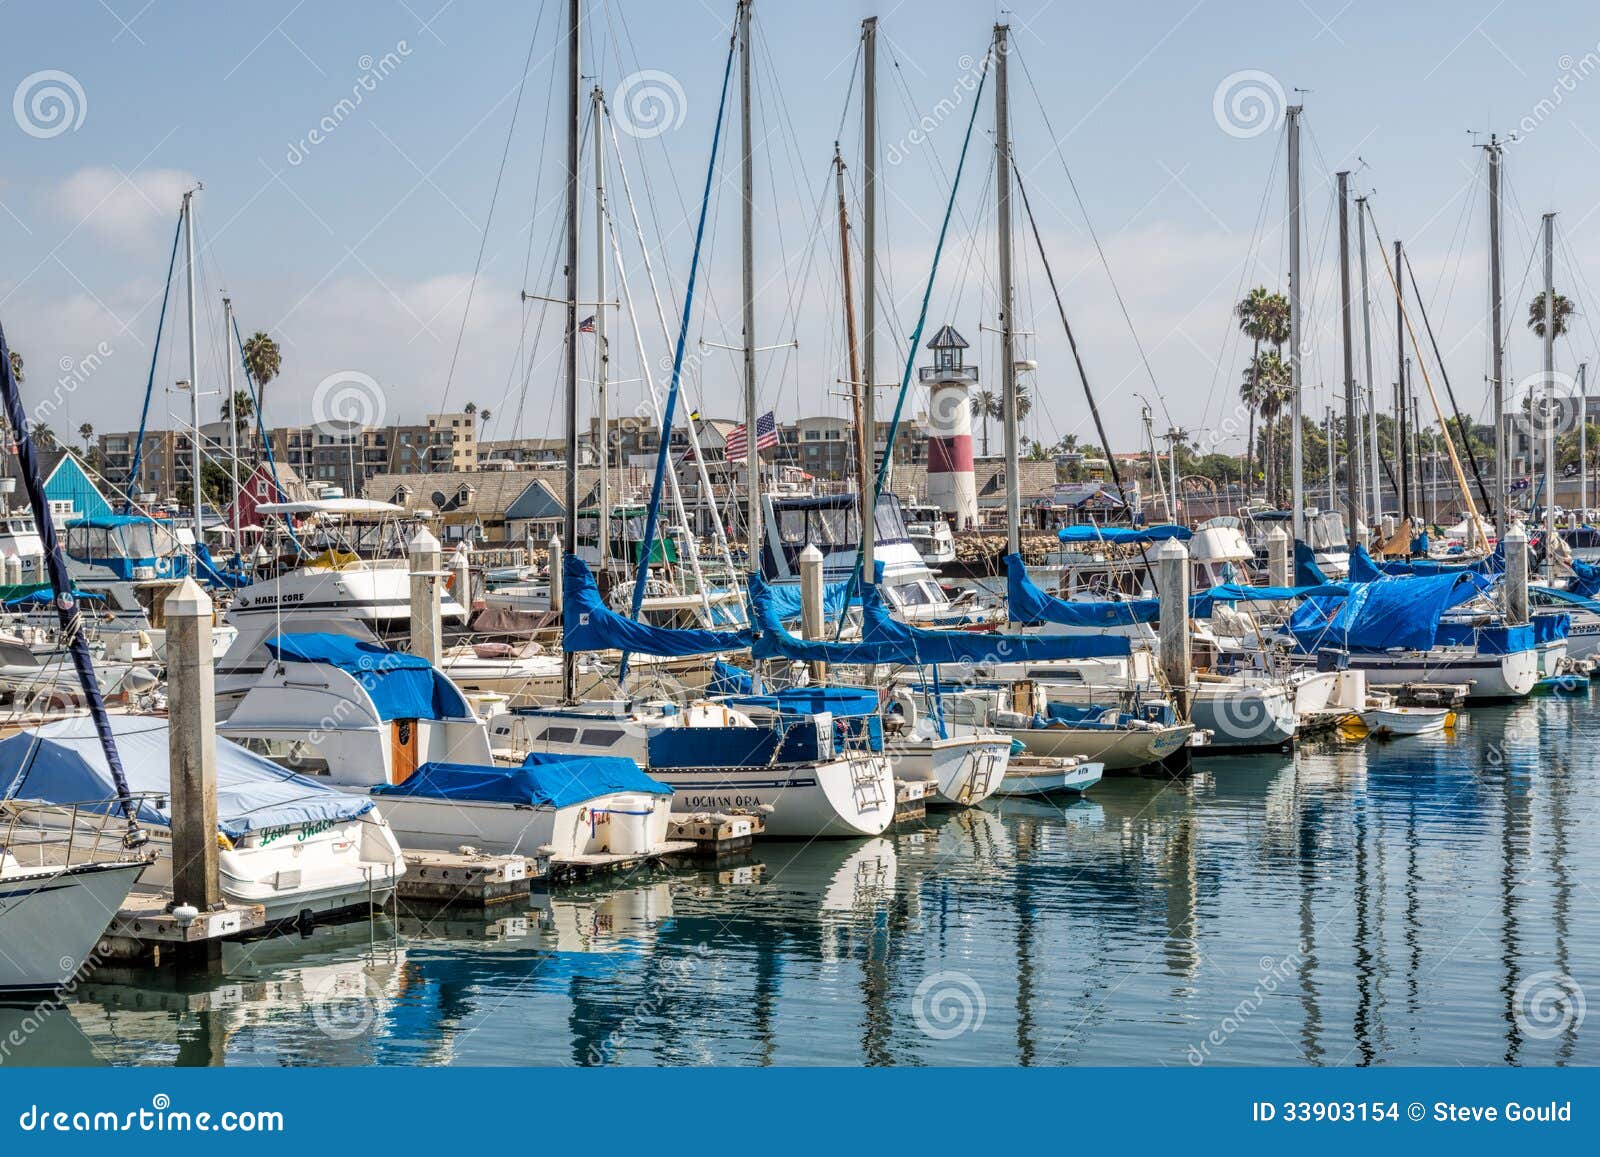 Sailboats in the harbor editorial stock image. Image of dock - 33903154